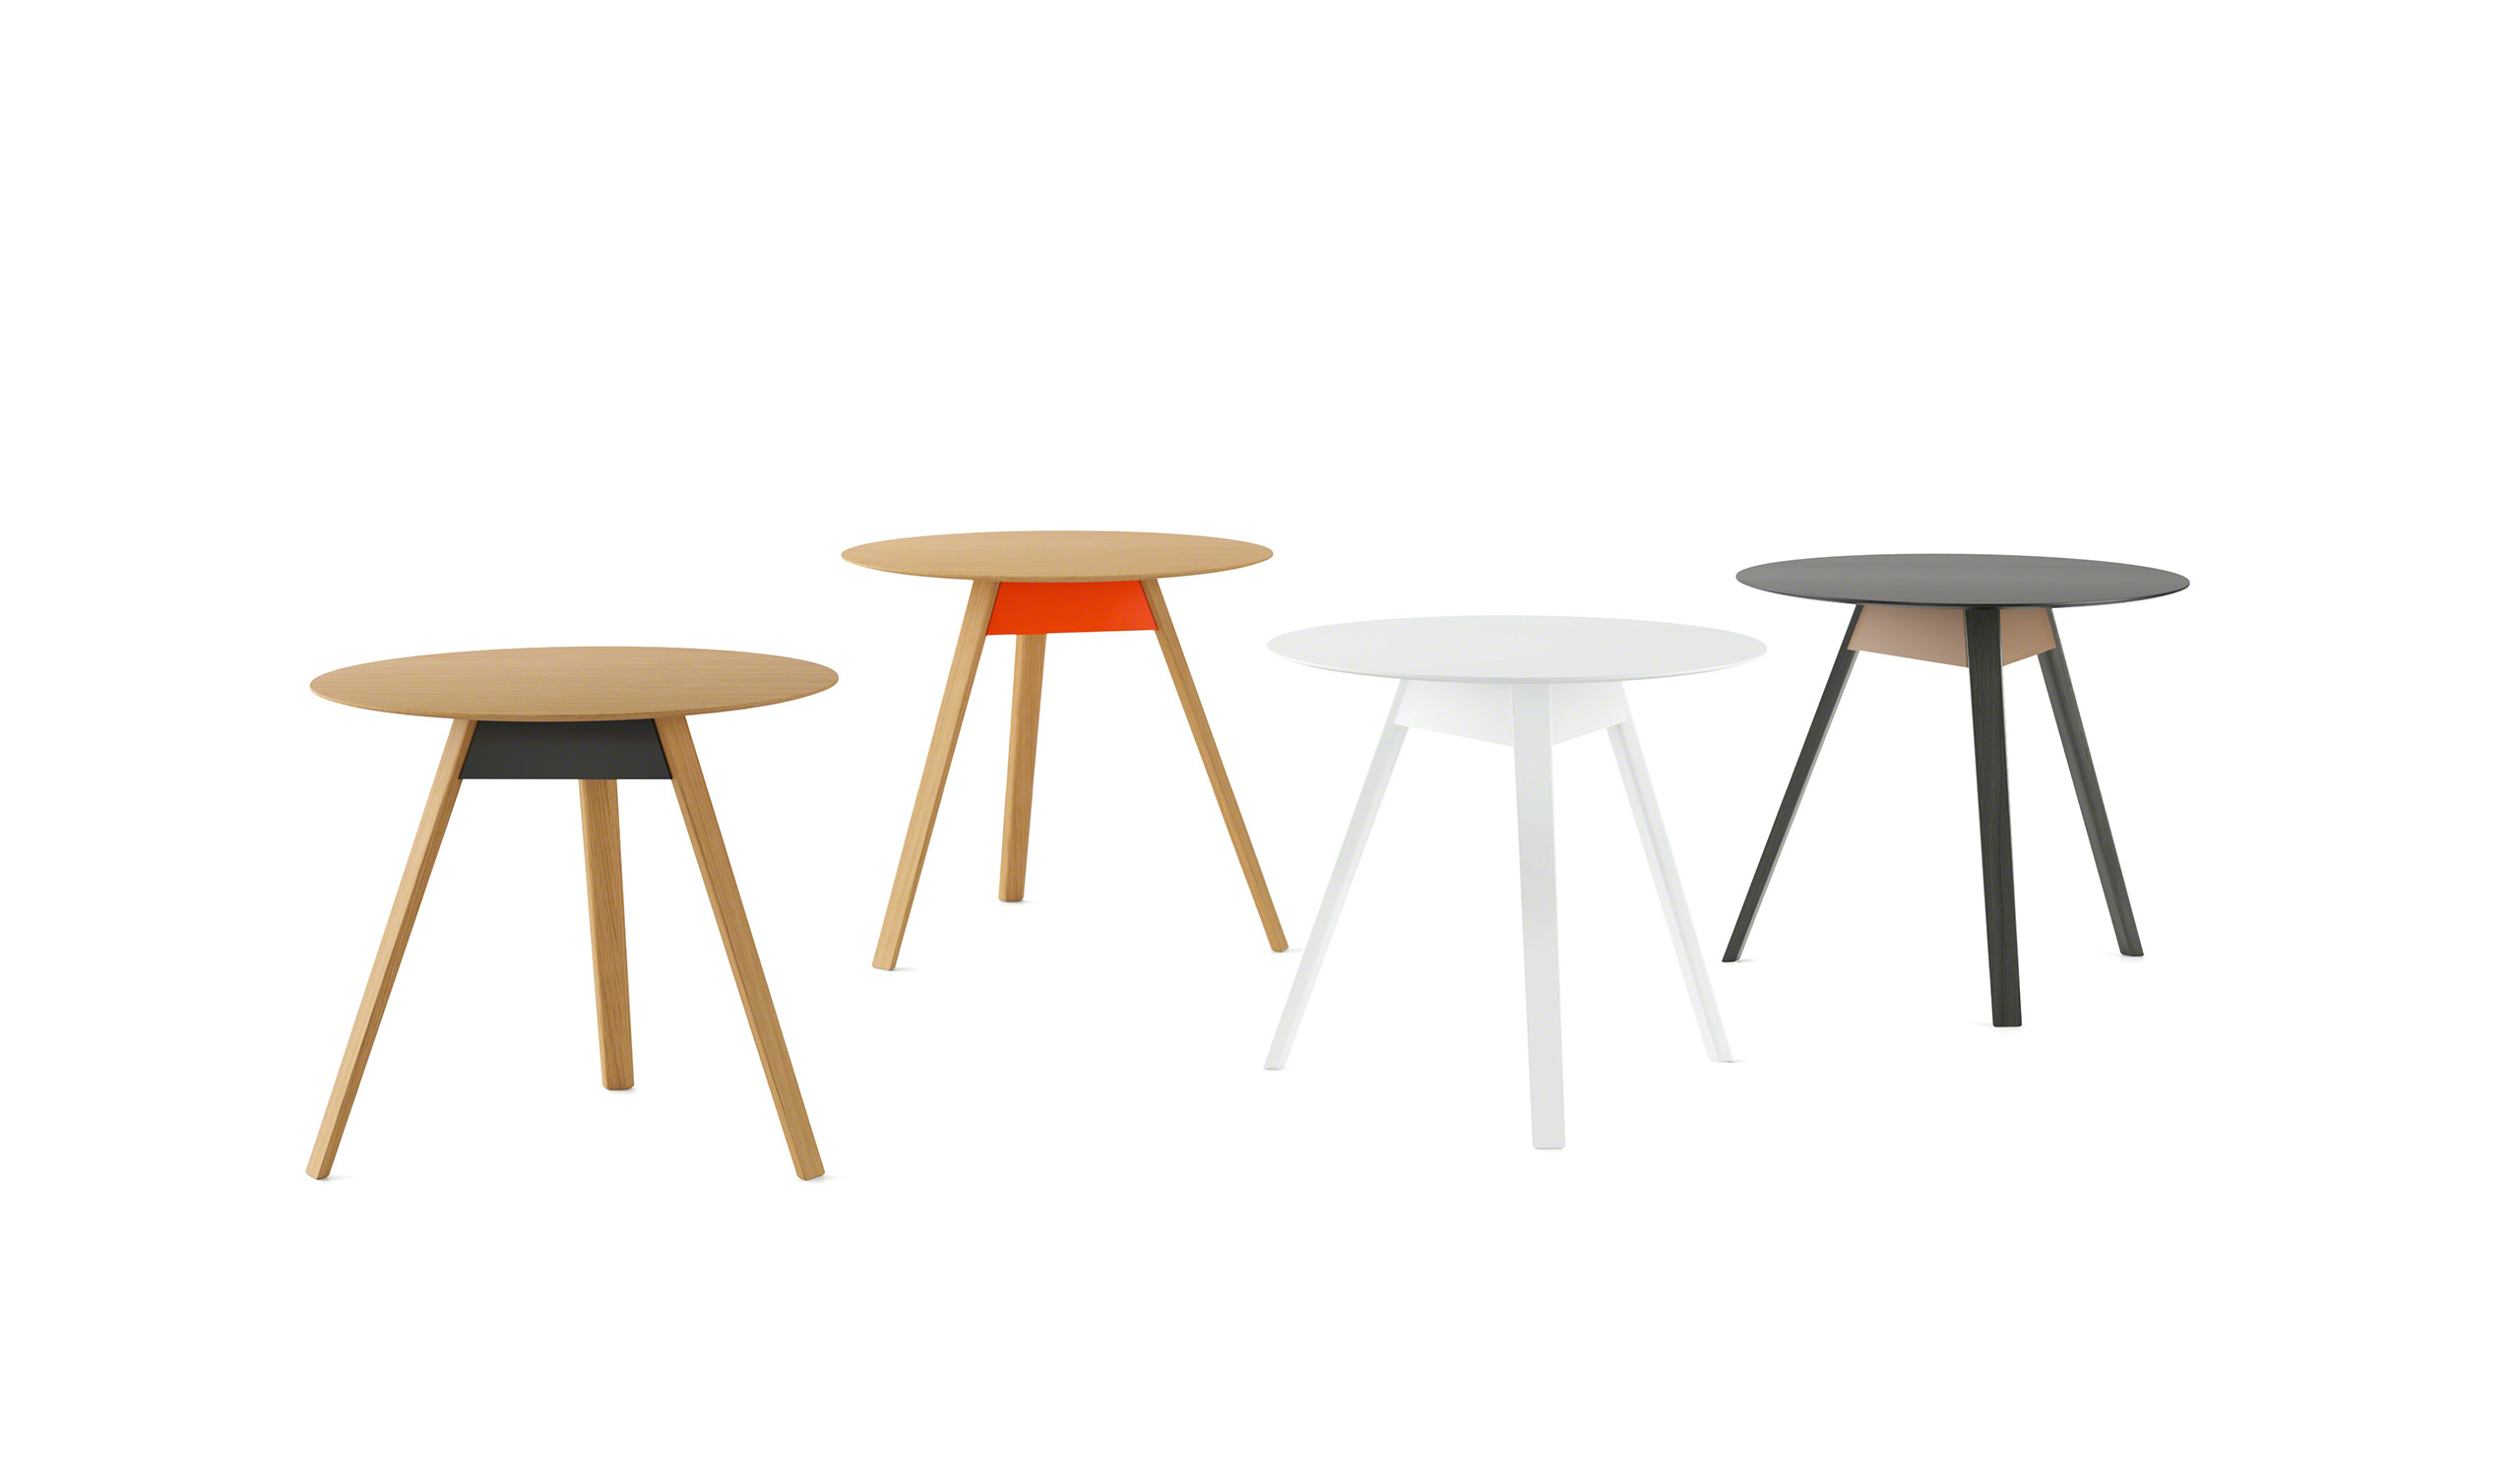 multiple trivio tables in different colors in a white background